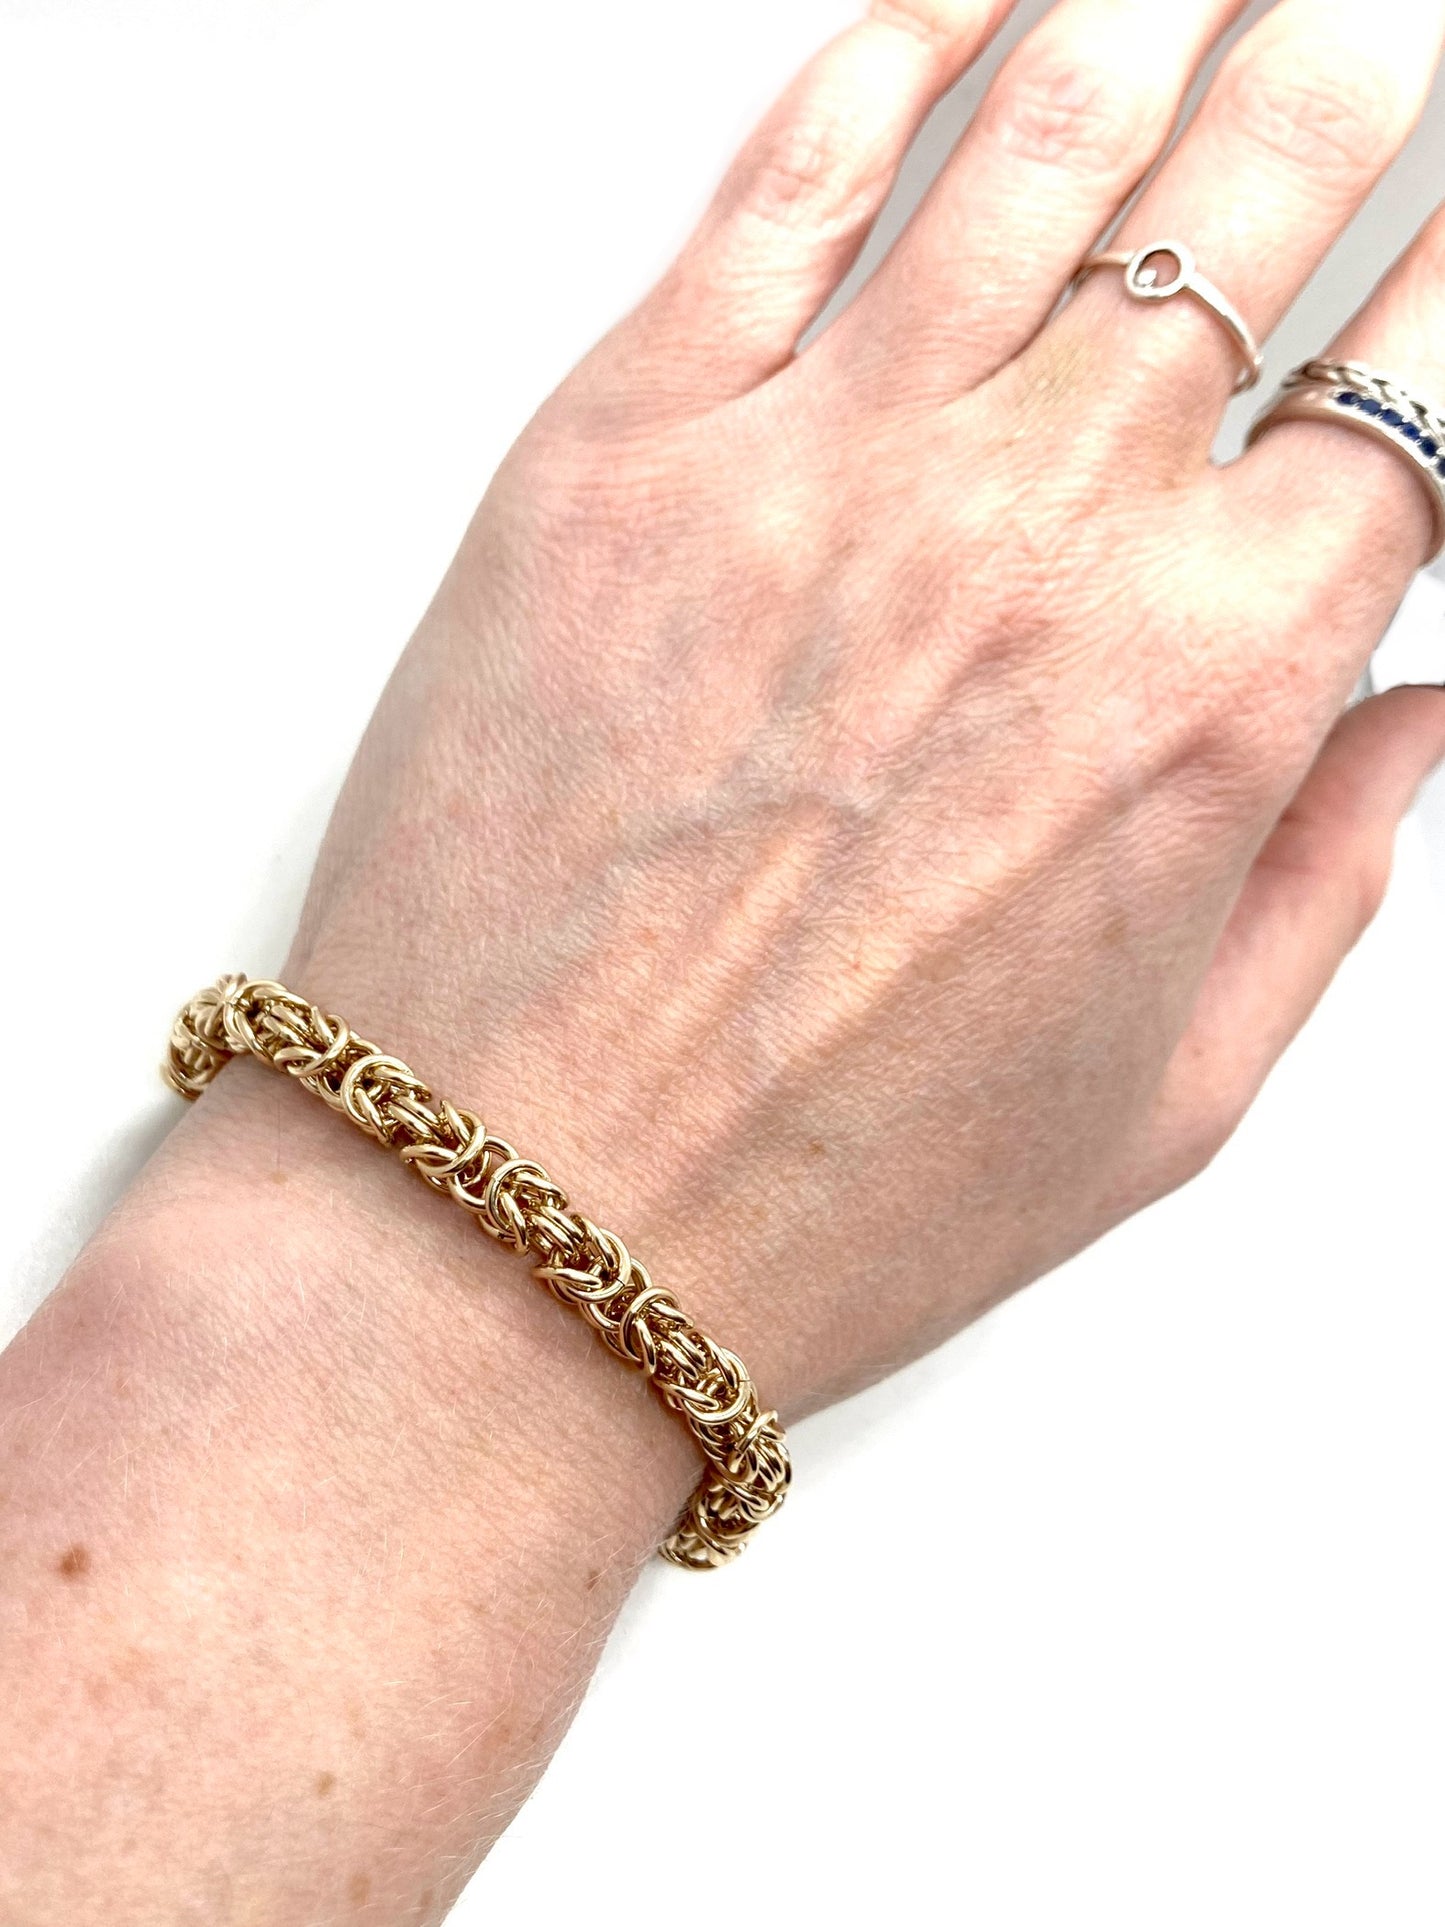 Byzantine Chainmaille Bracelet in 14K Gold Fill